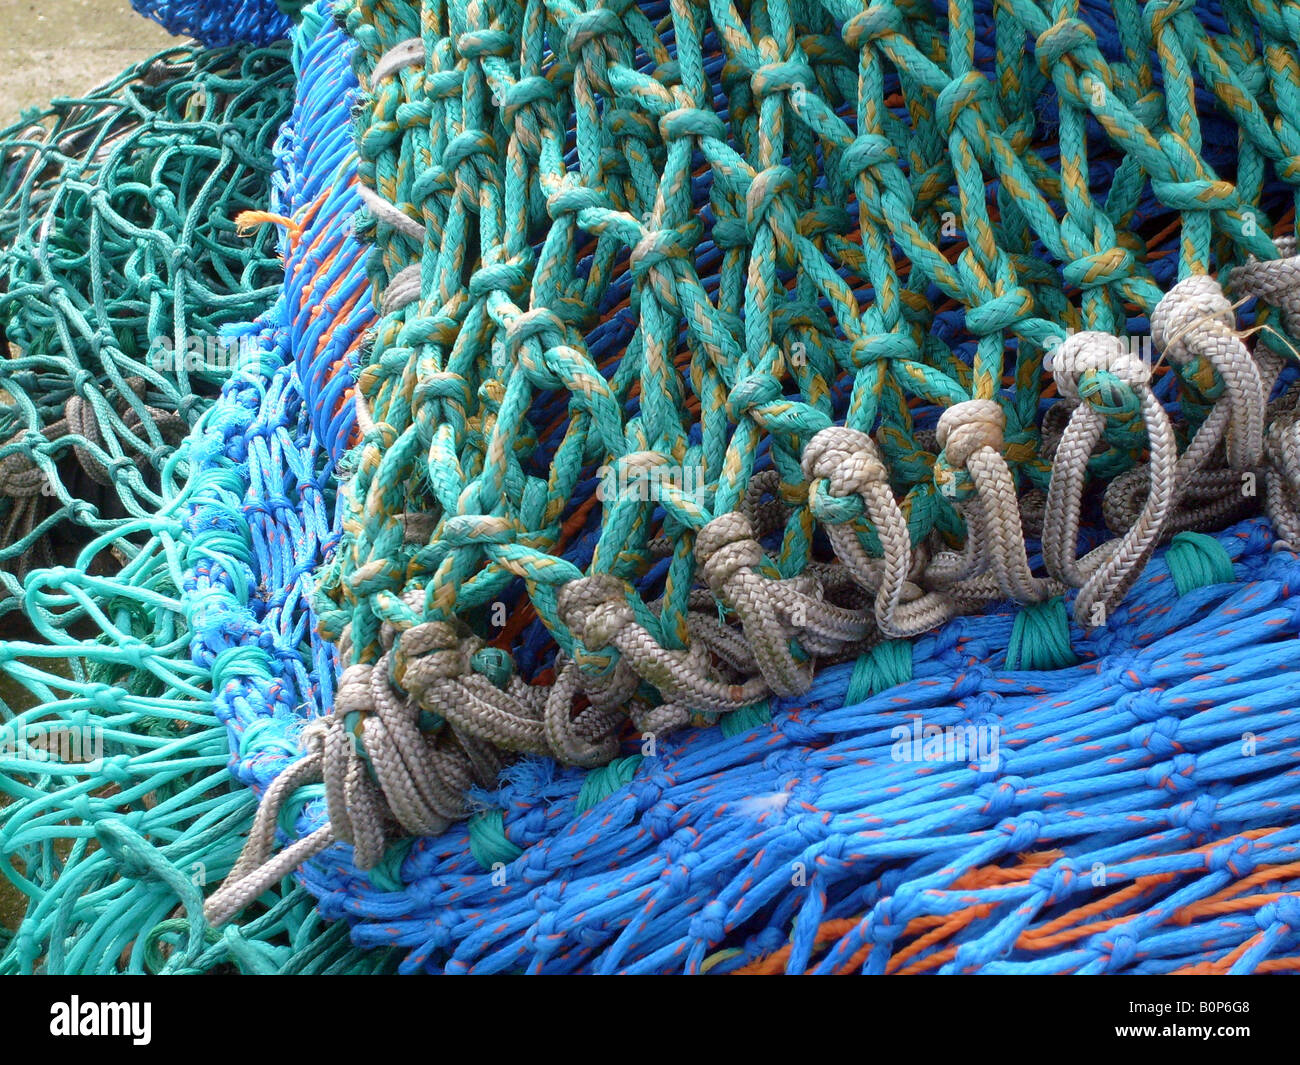 Close up of some colorful fishing nets in harbor Stock Photo